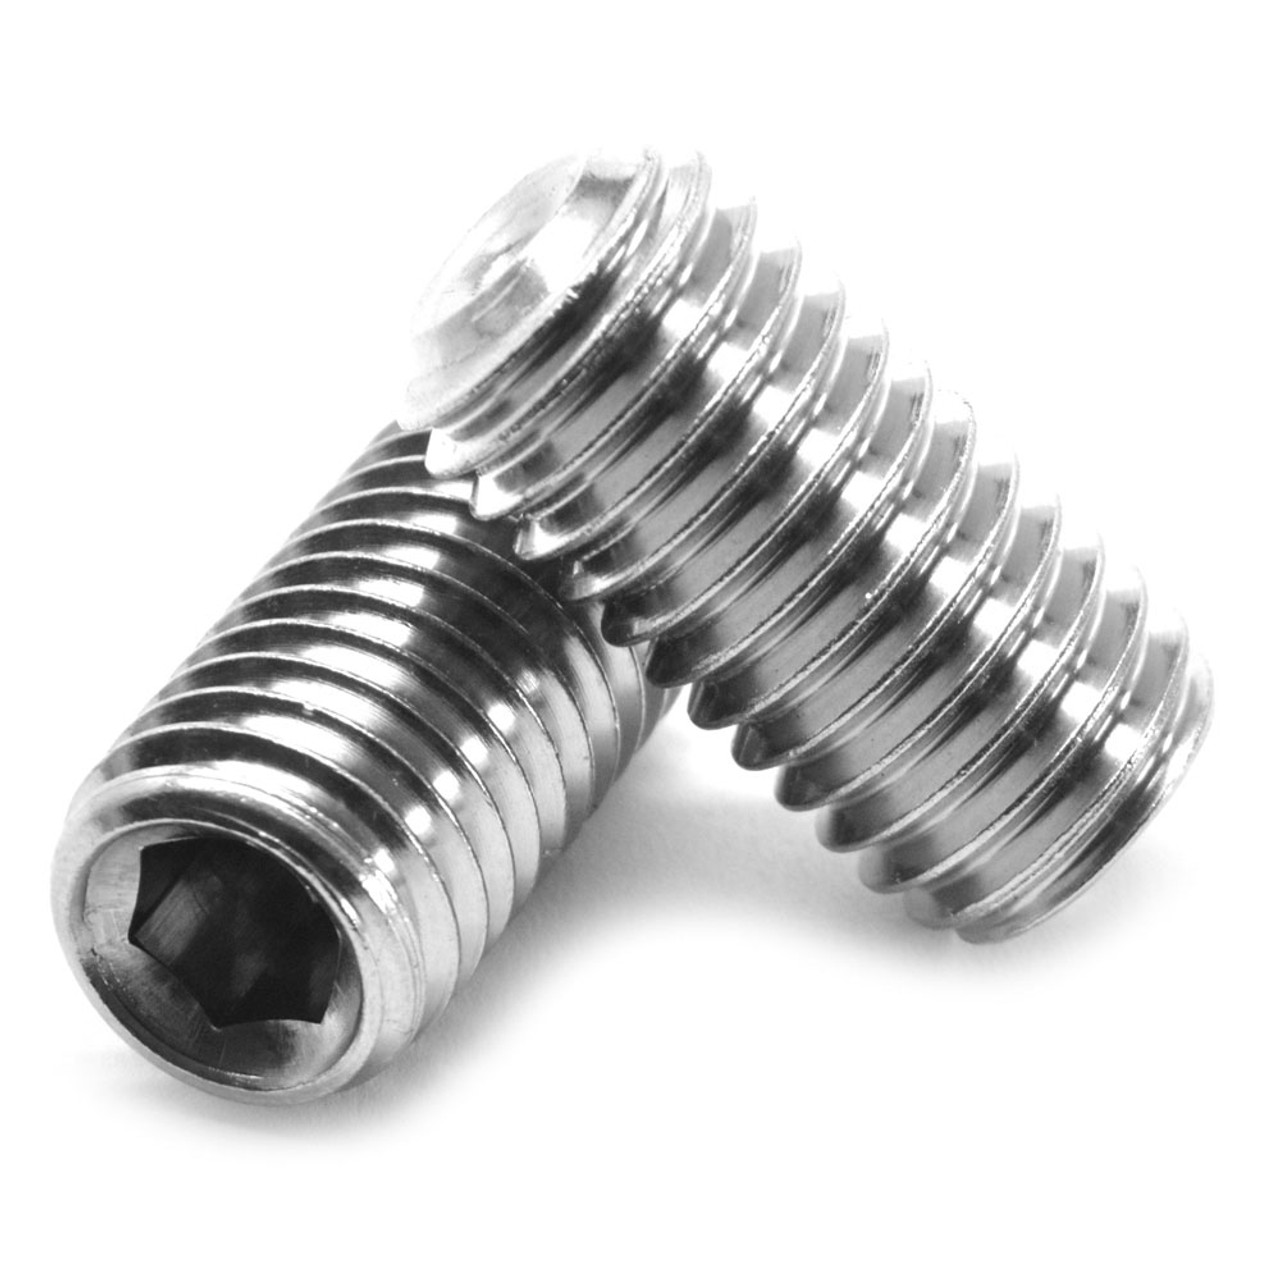 M3 x 4mm Socket Set Grub Screws Cup Point Stainless Steel 10 Pack with 1.5  mm Hex Key Wrench (4mm Length)